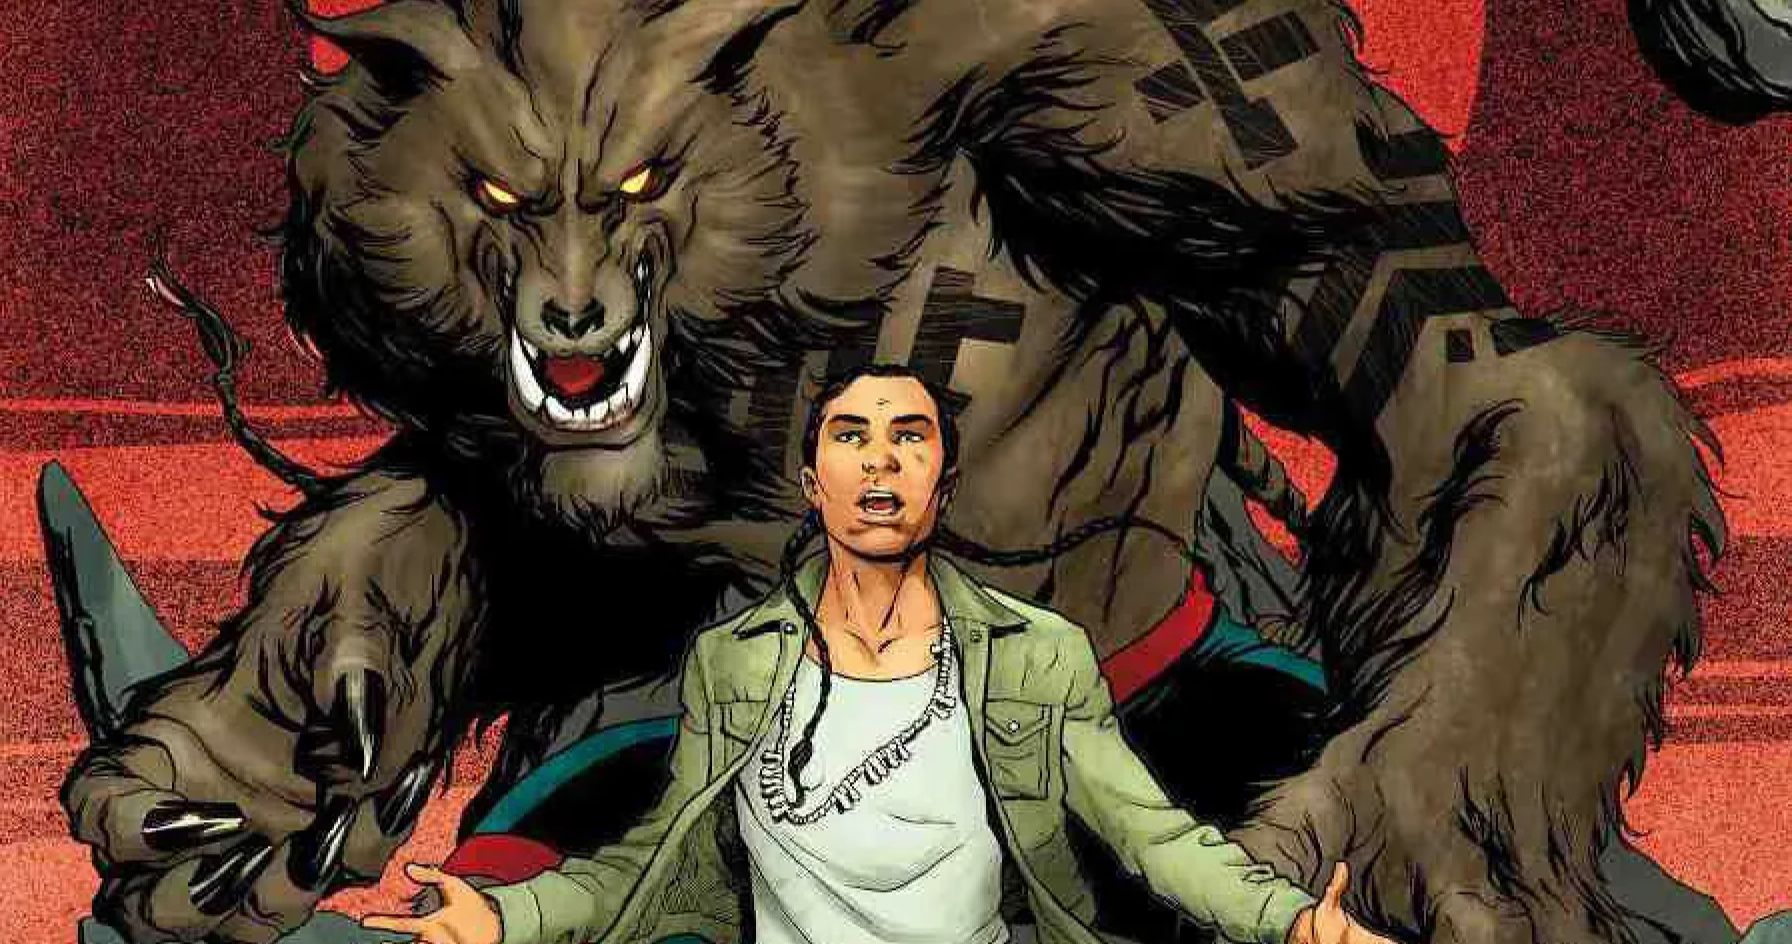 Werewolf by Night  Release date, cast and news for Marvel special